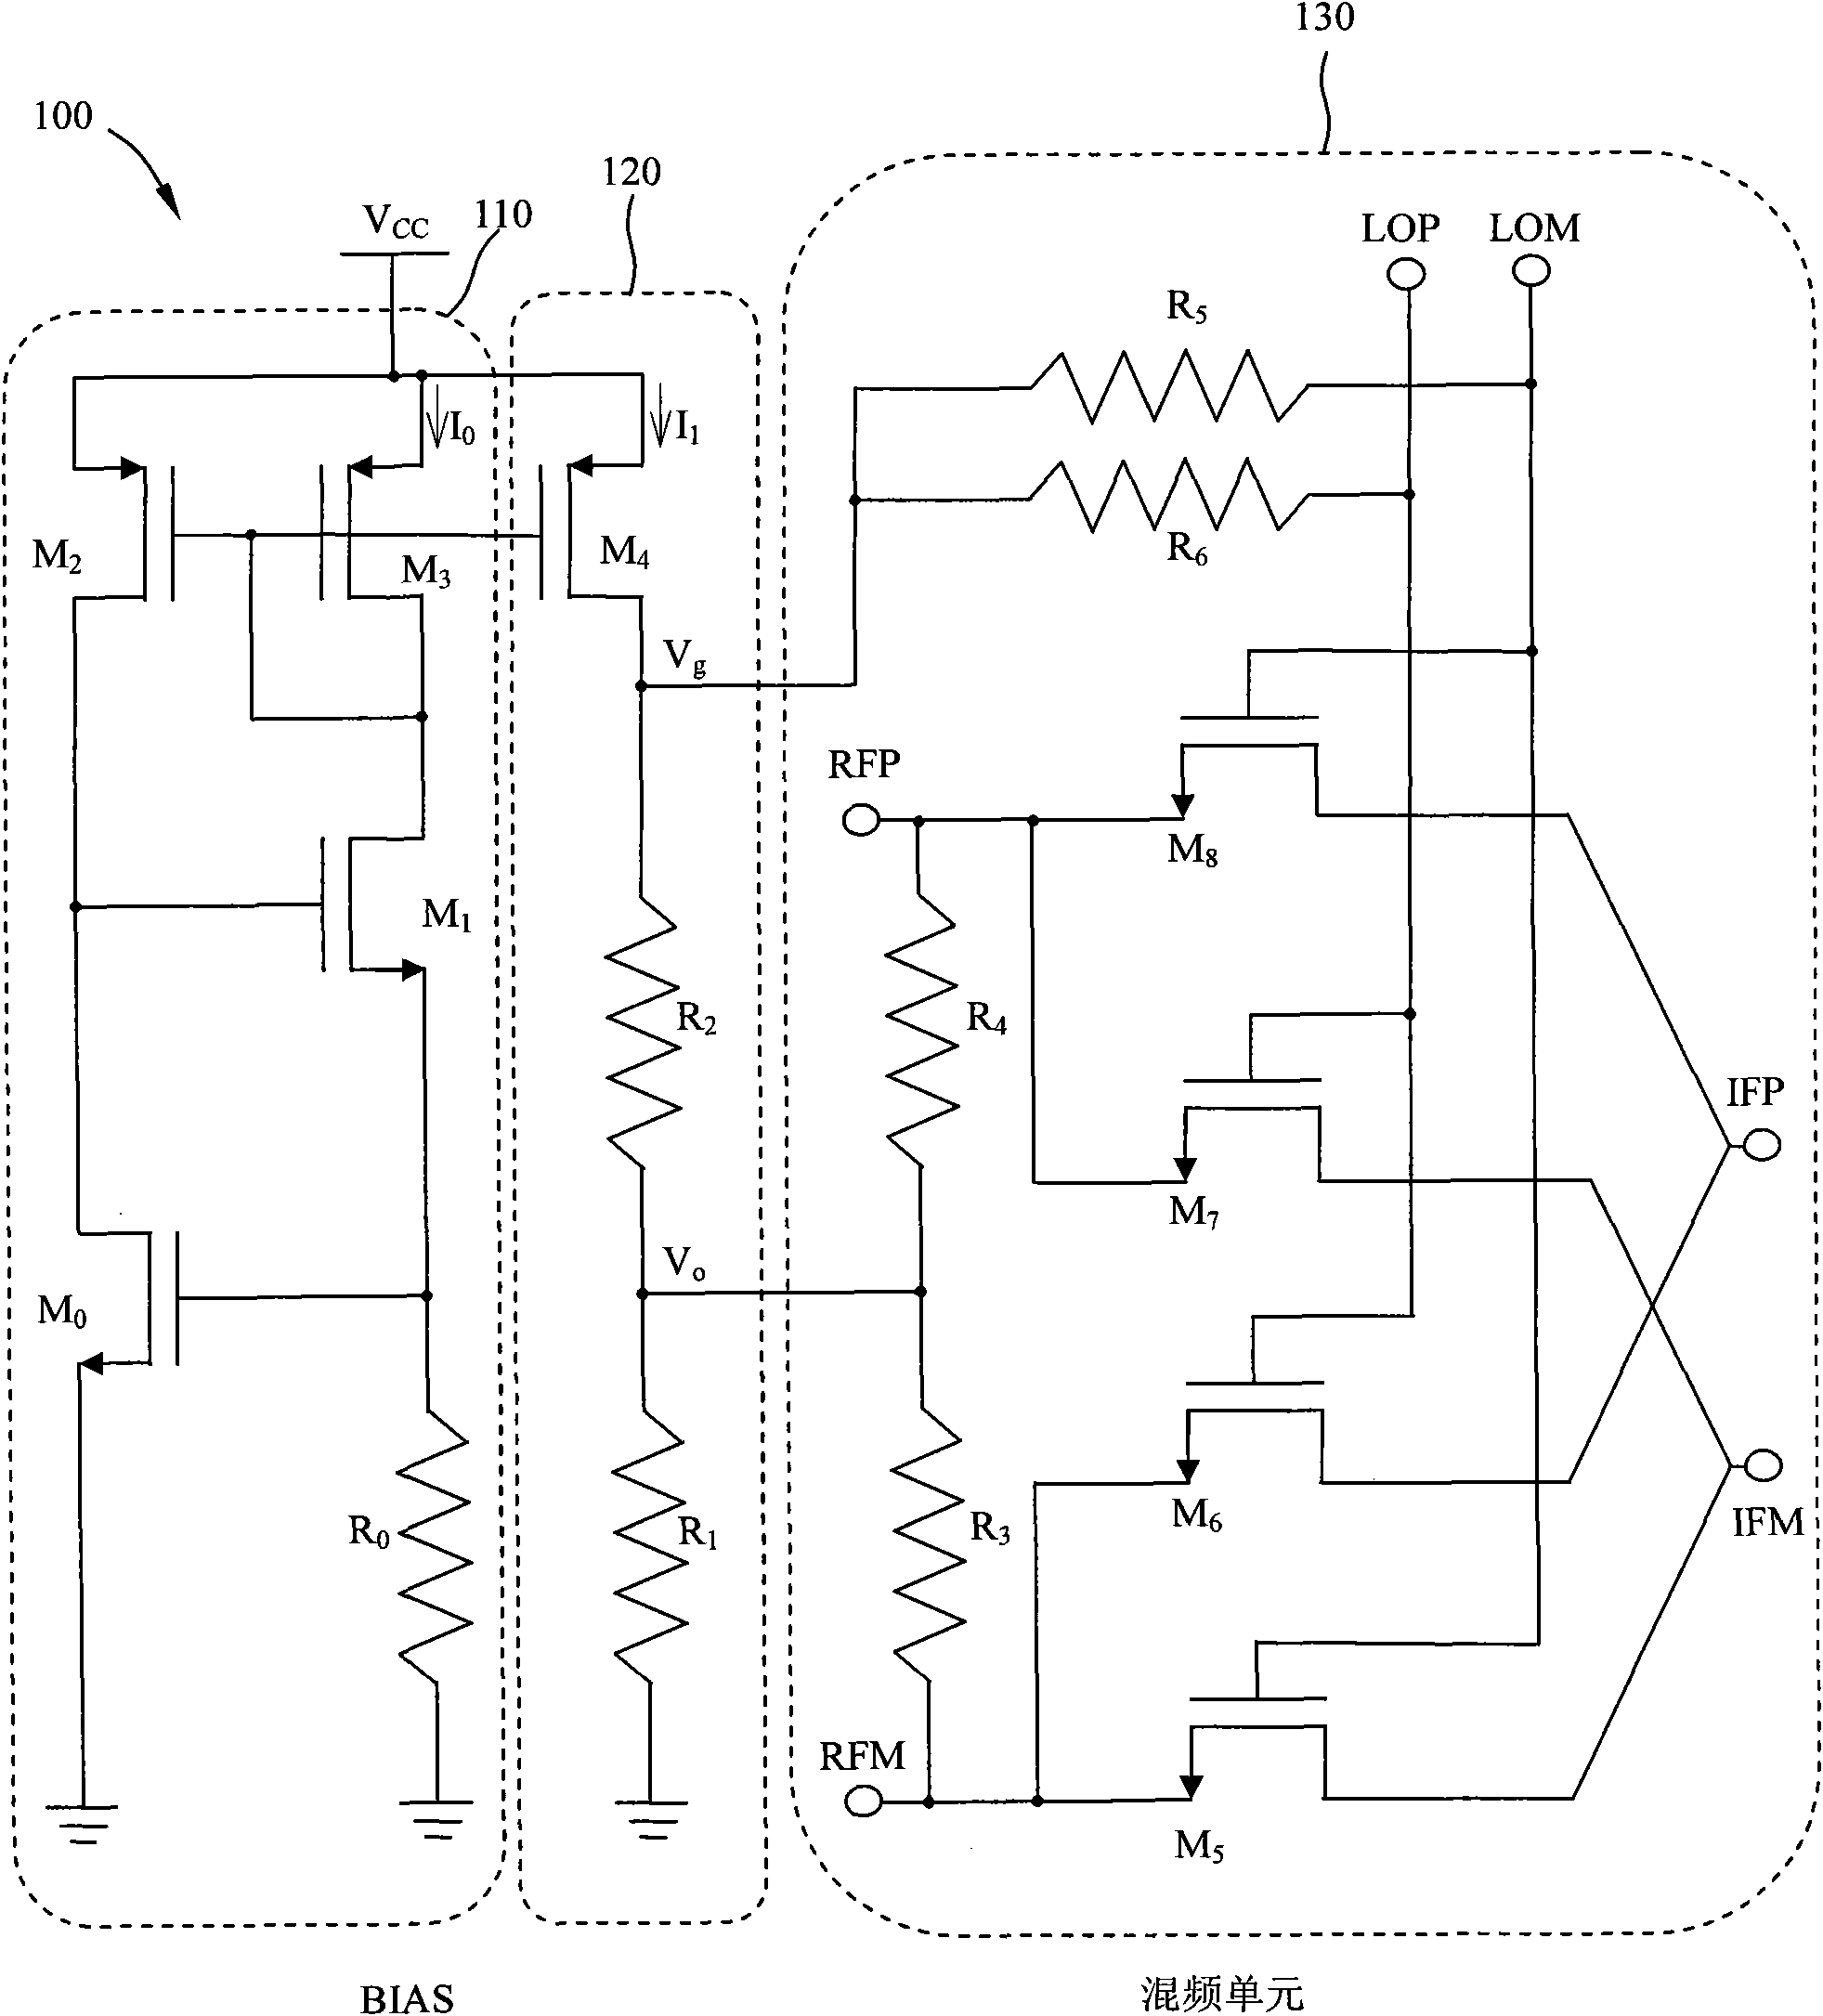 Passive mixer bias circuit capable of following threshold voltage of MOS (metal oxide semiconductor) transistor